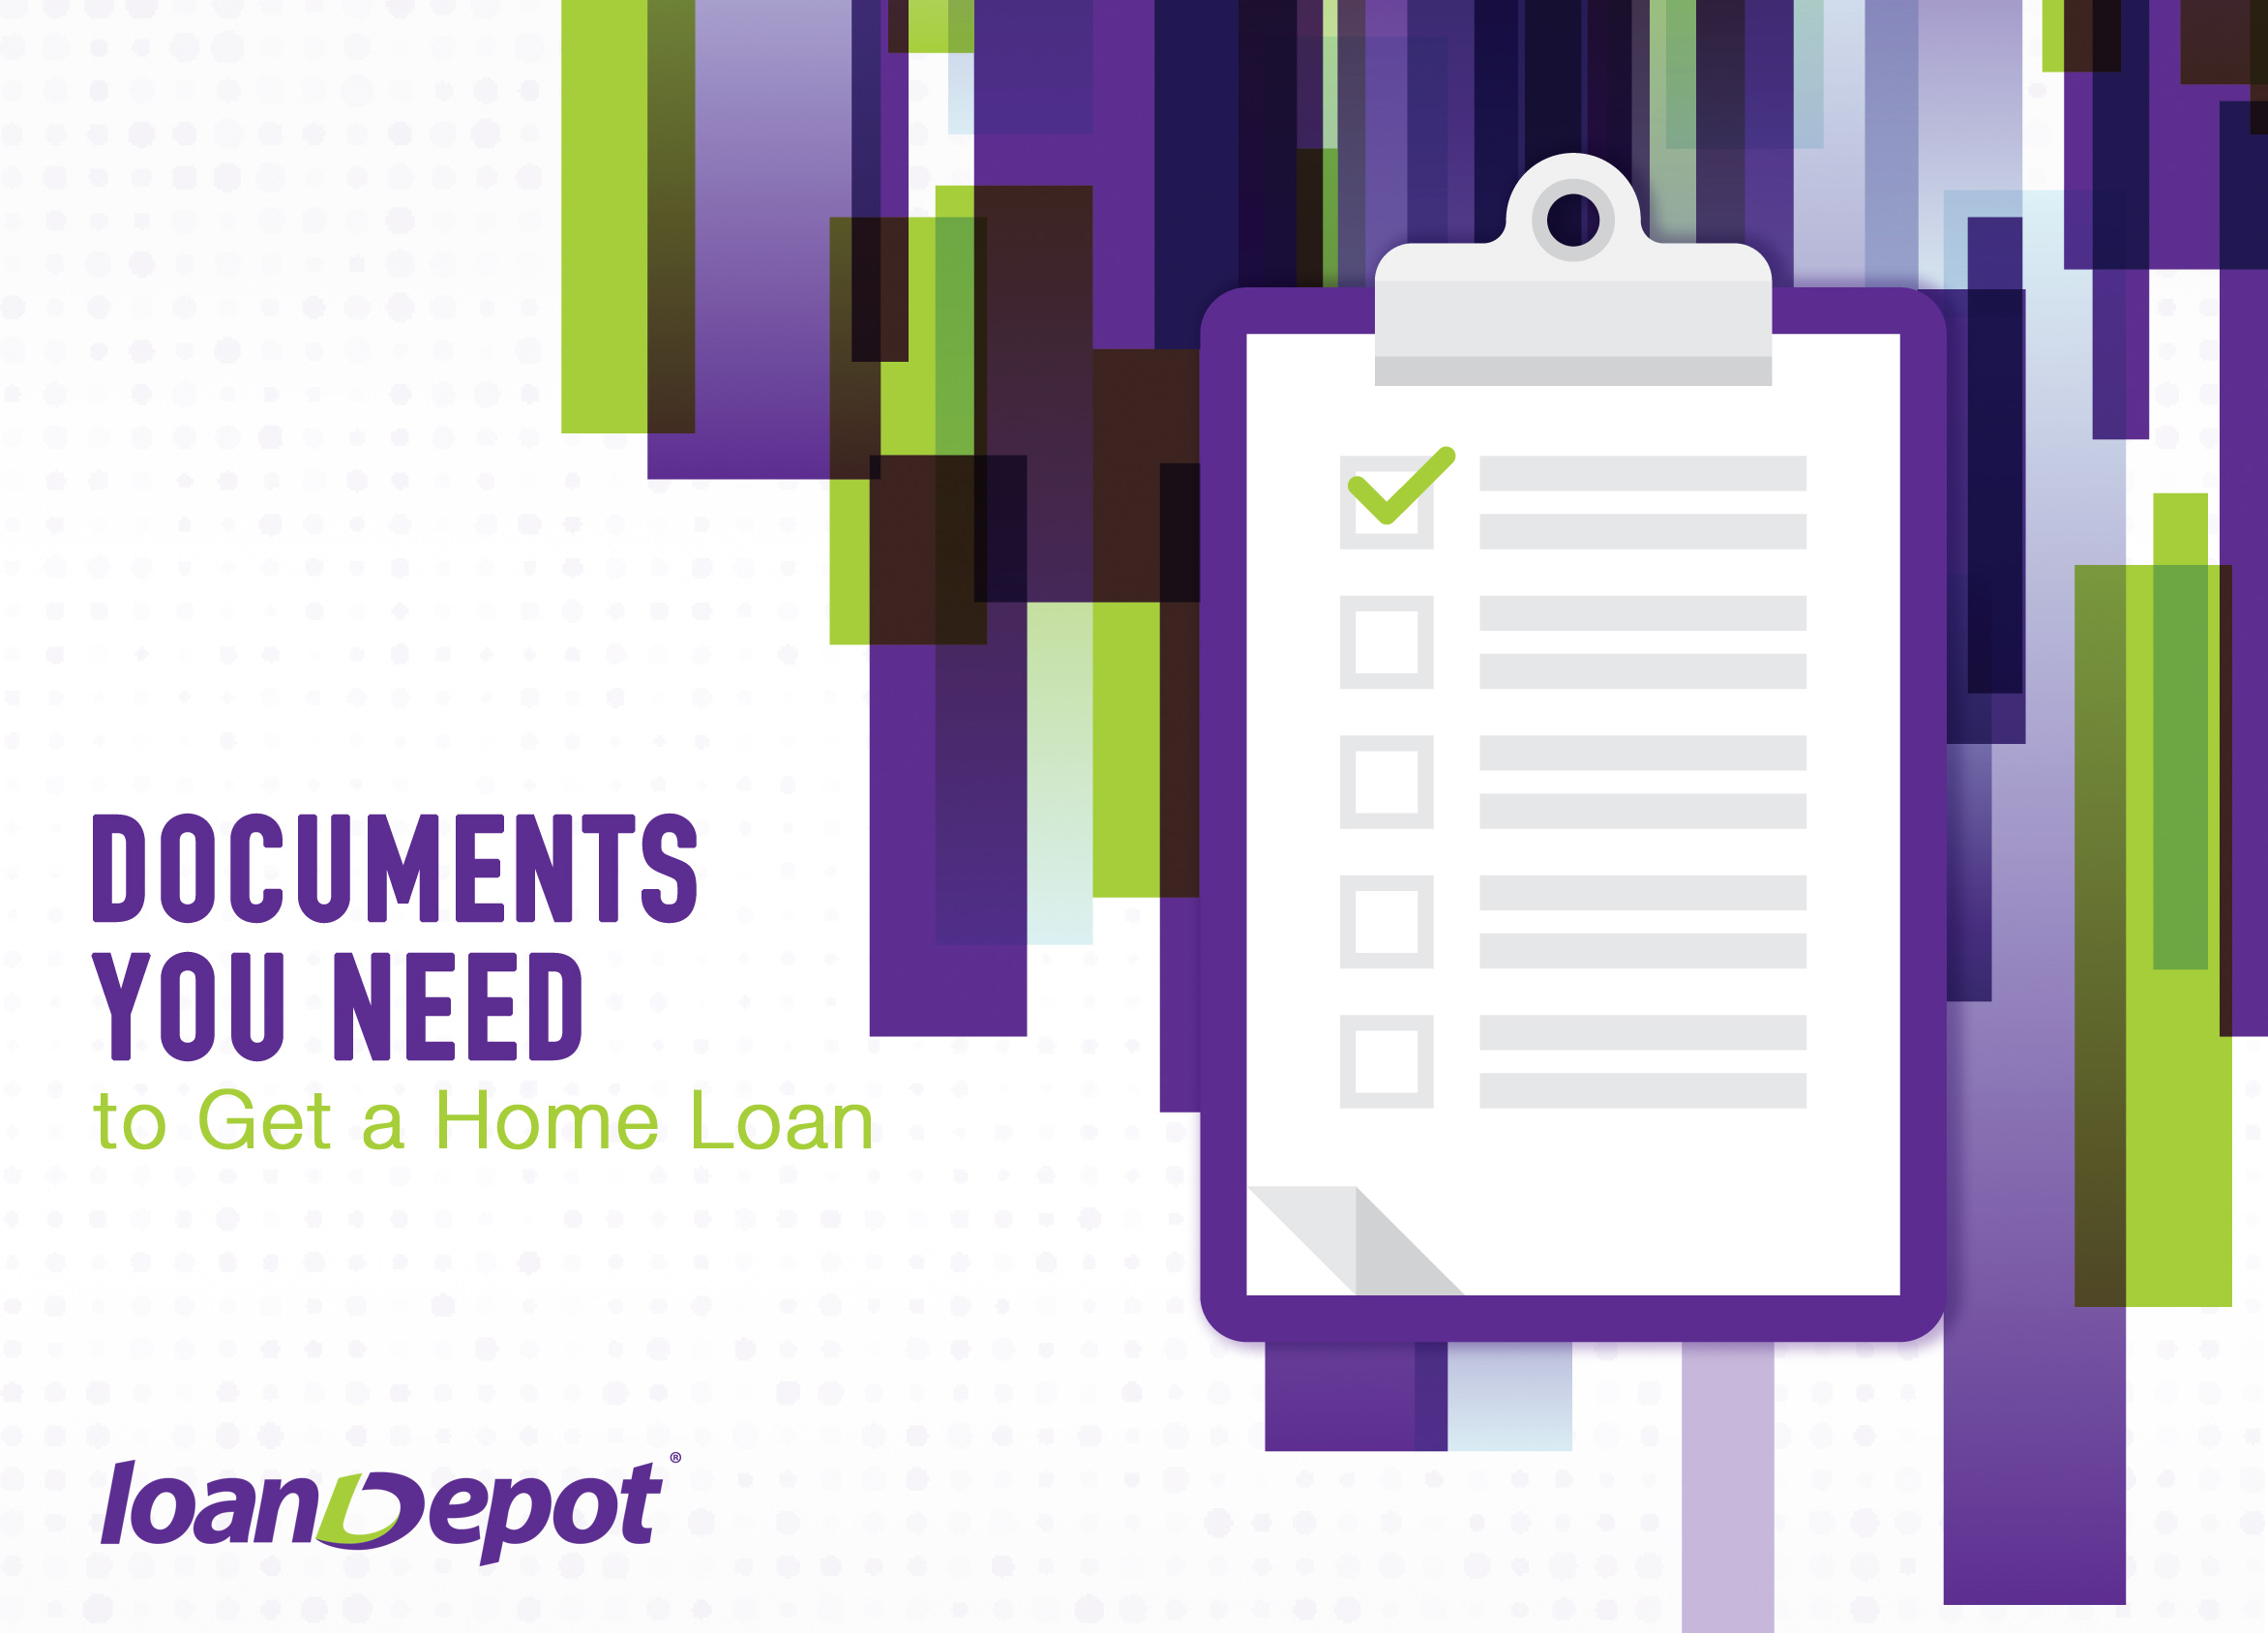 Documents You Need to Get a Home Loan